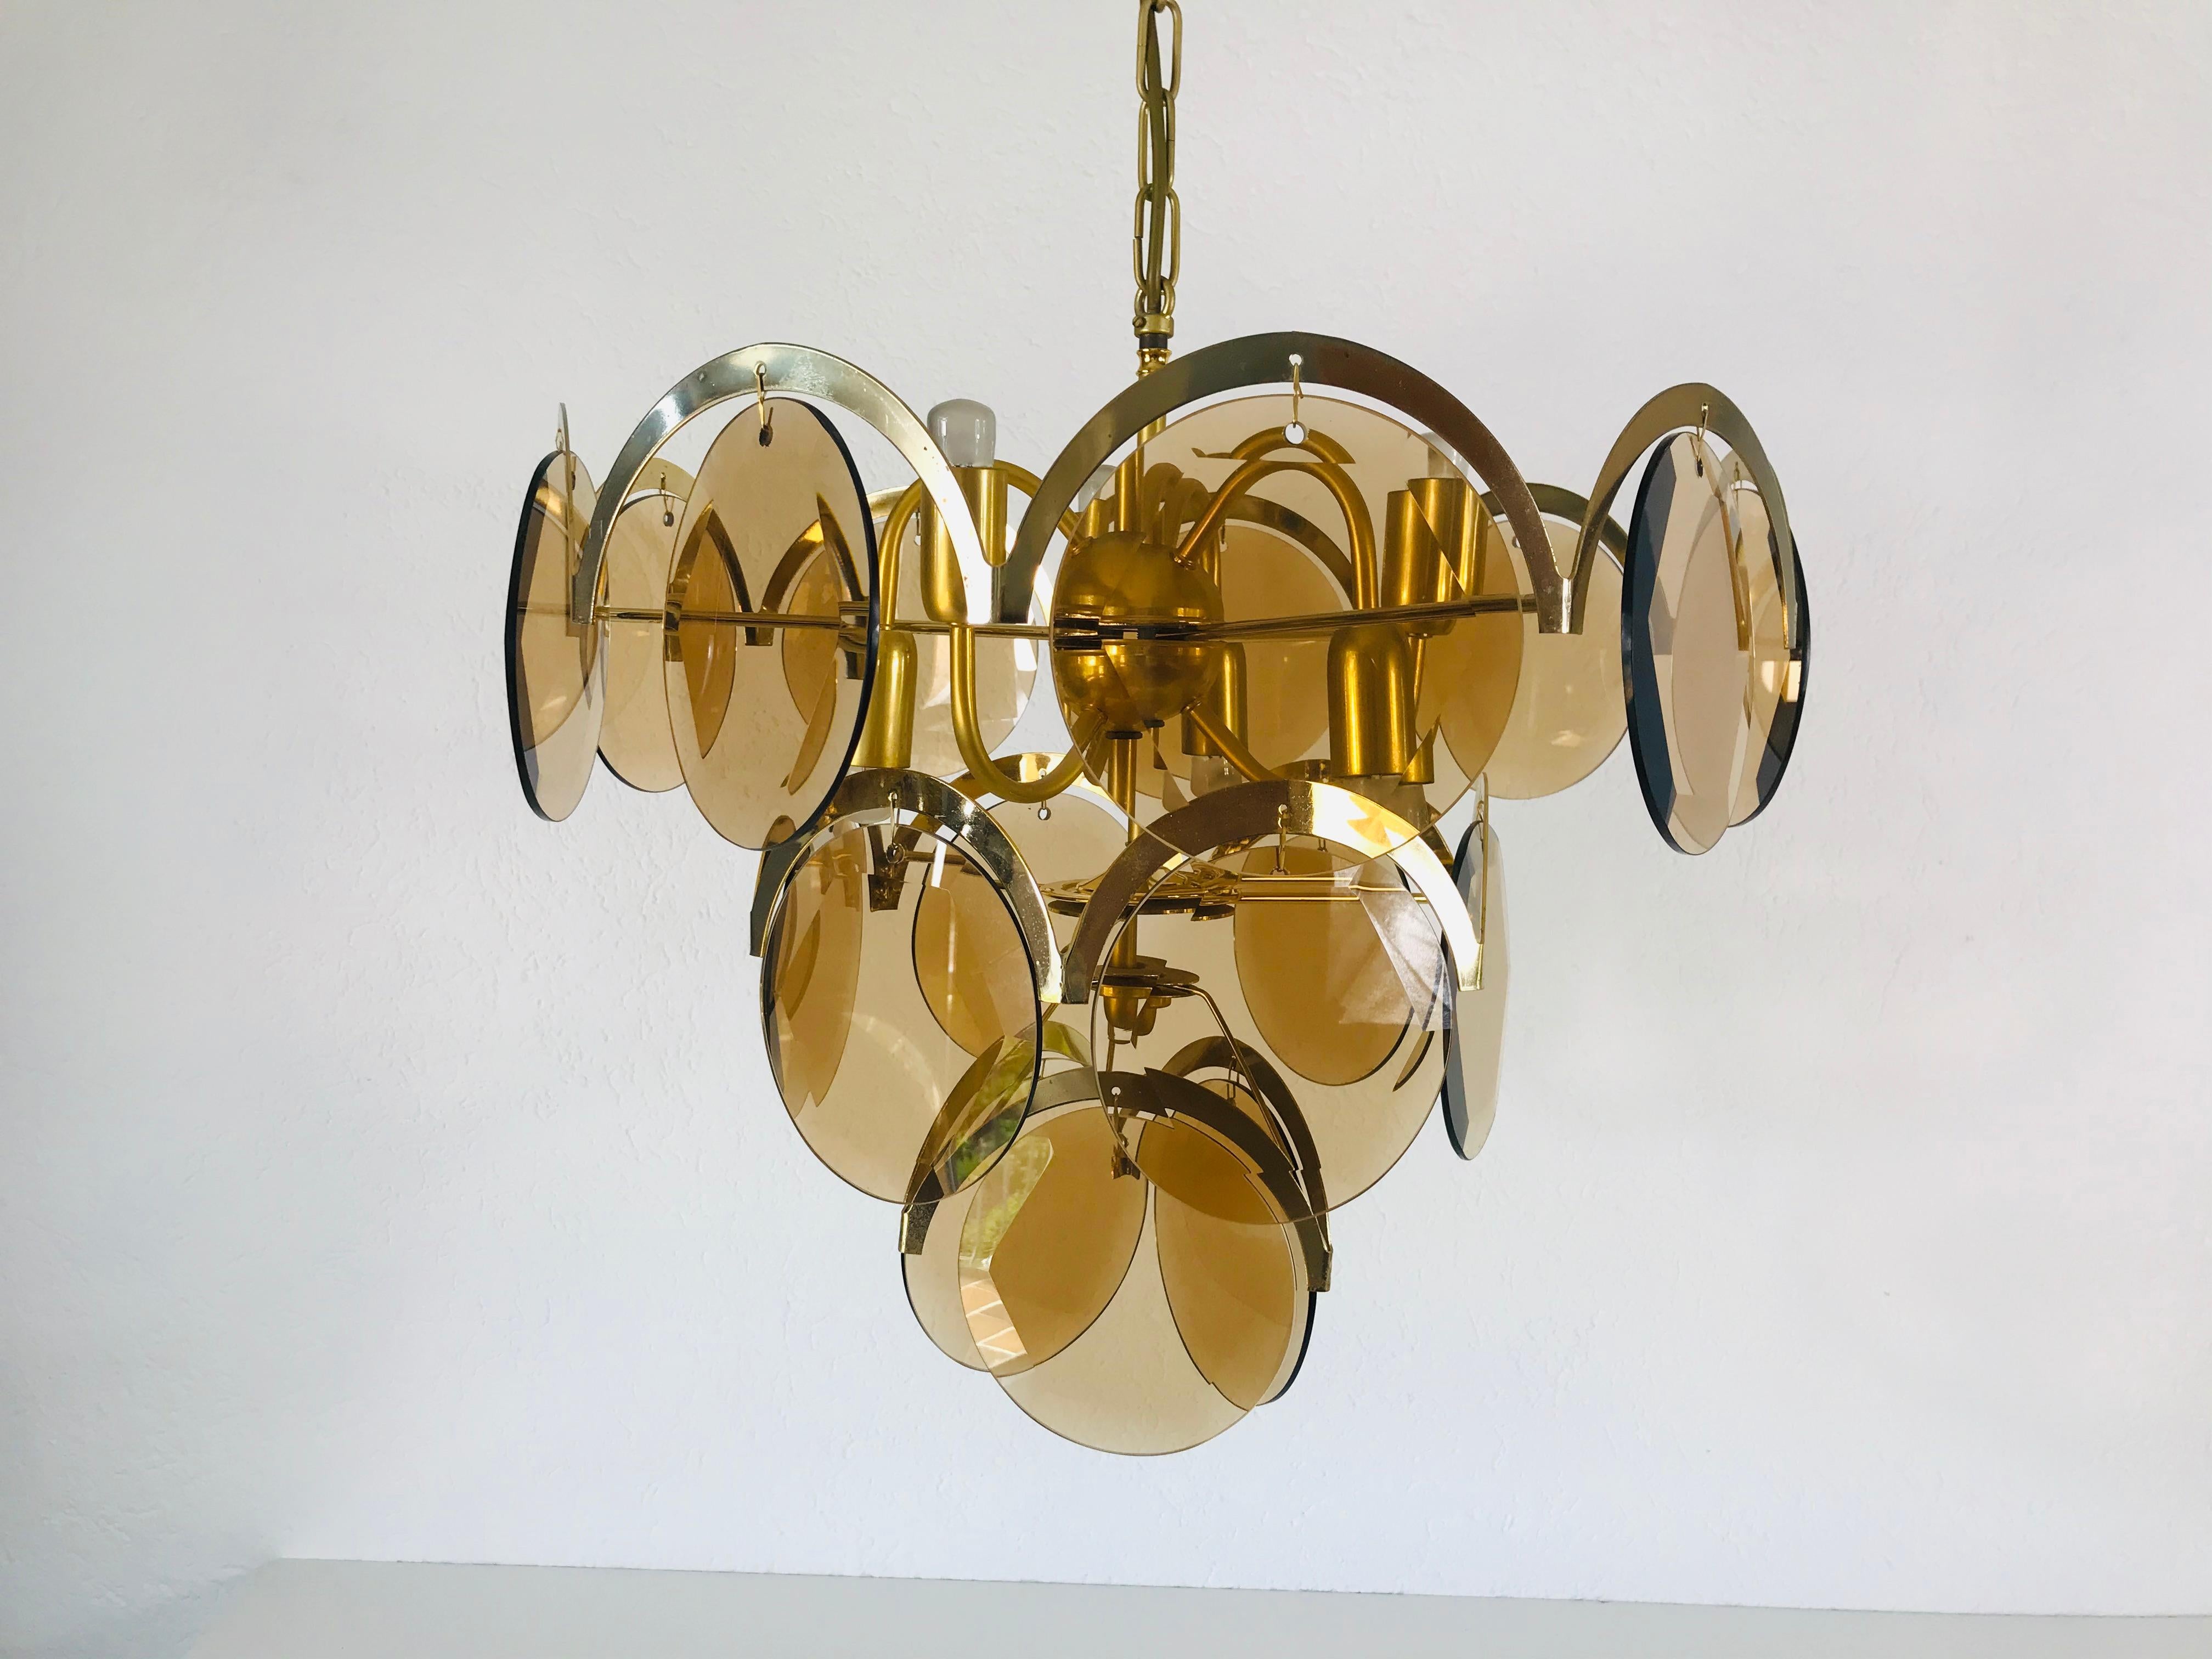 Midcentury Three-Tier Brass and Glass Chandelier by Vistosi, 1960s For Sale 6